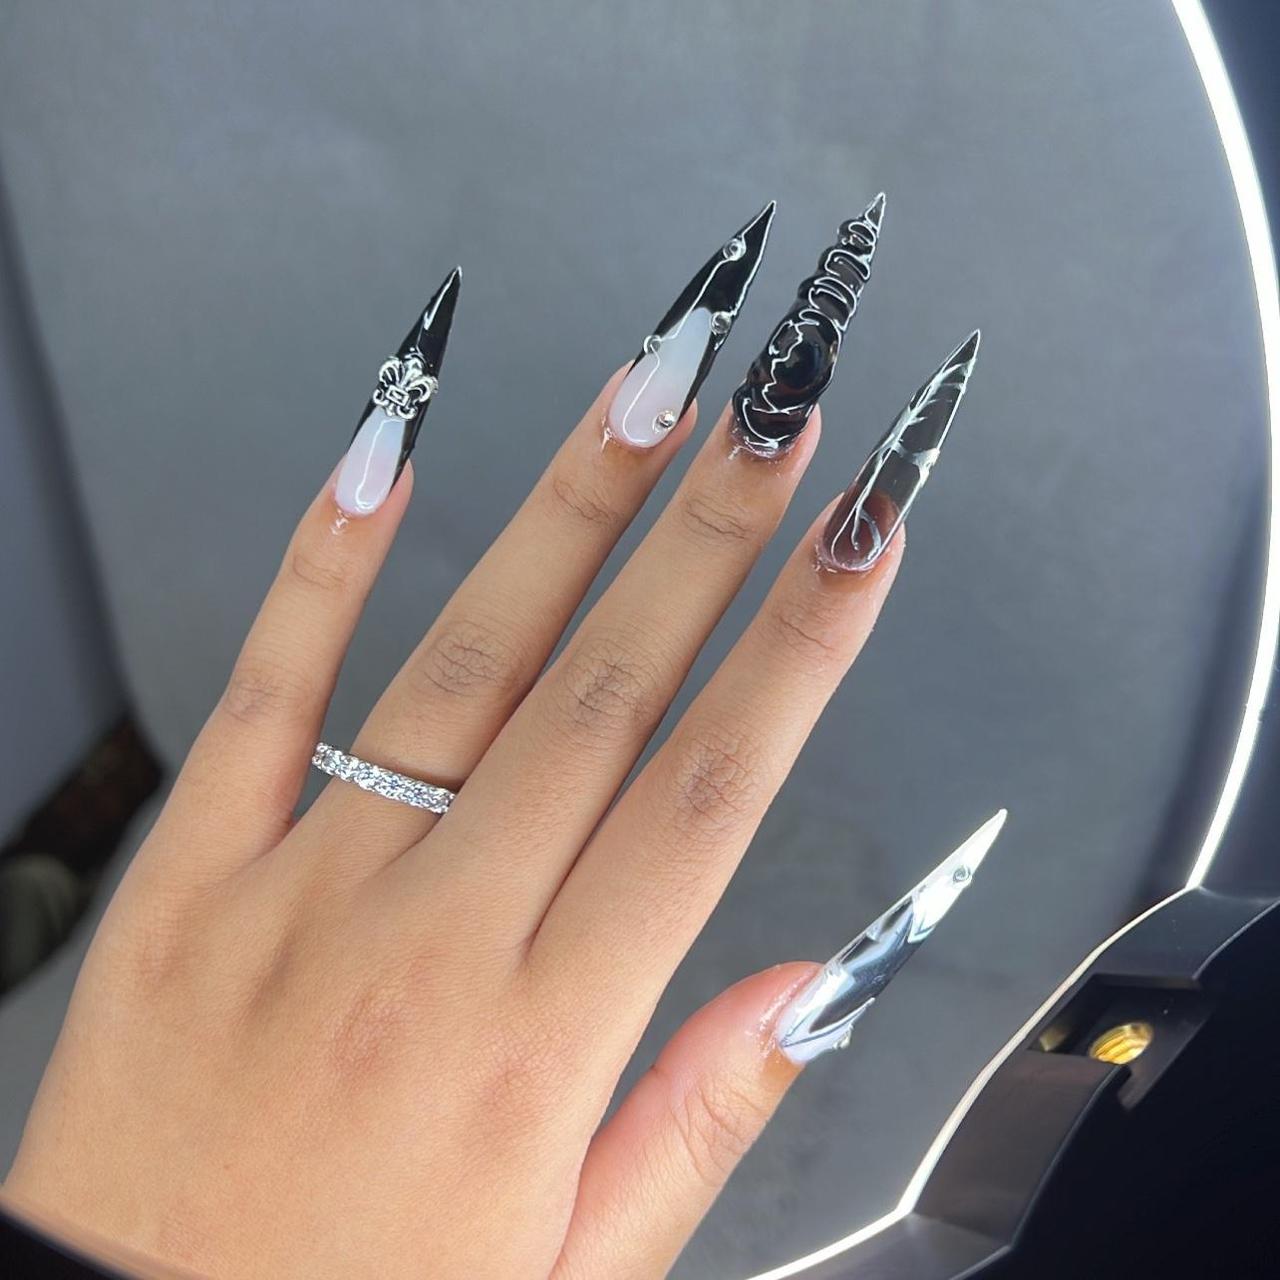 Black and silver stiletto nails with rhinestones and - Depop